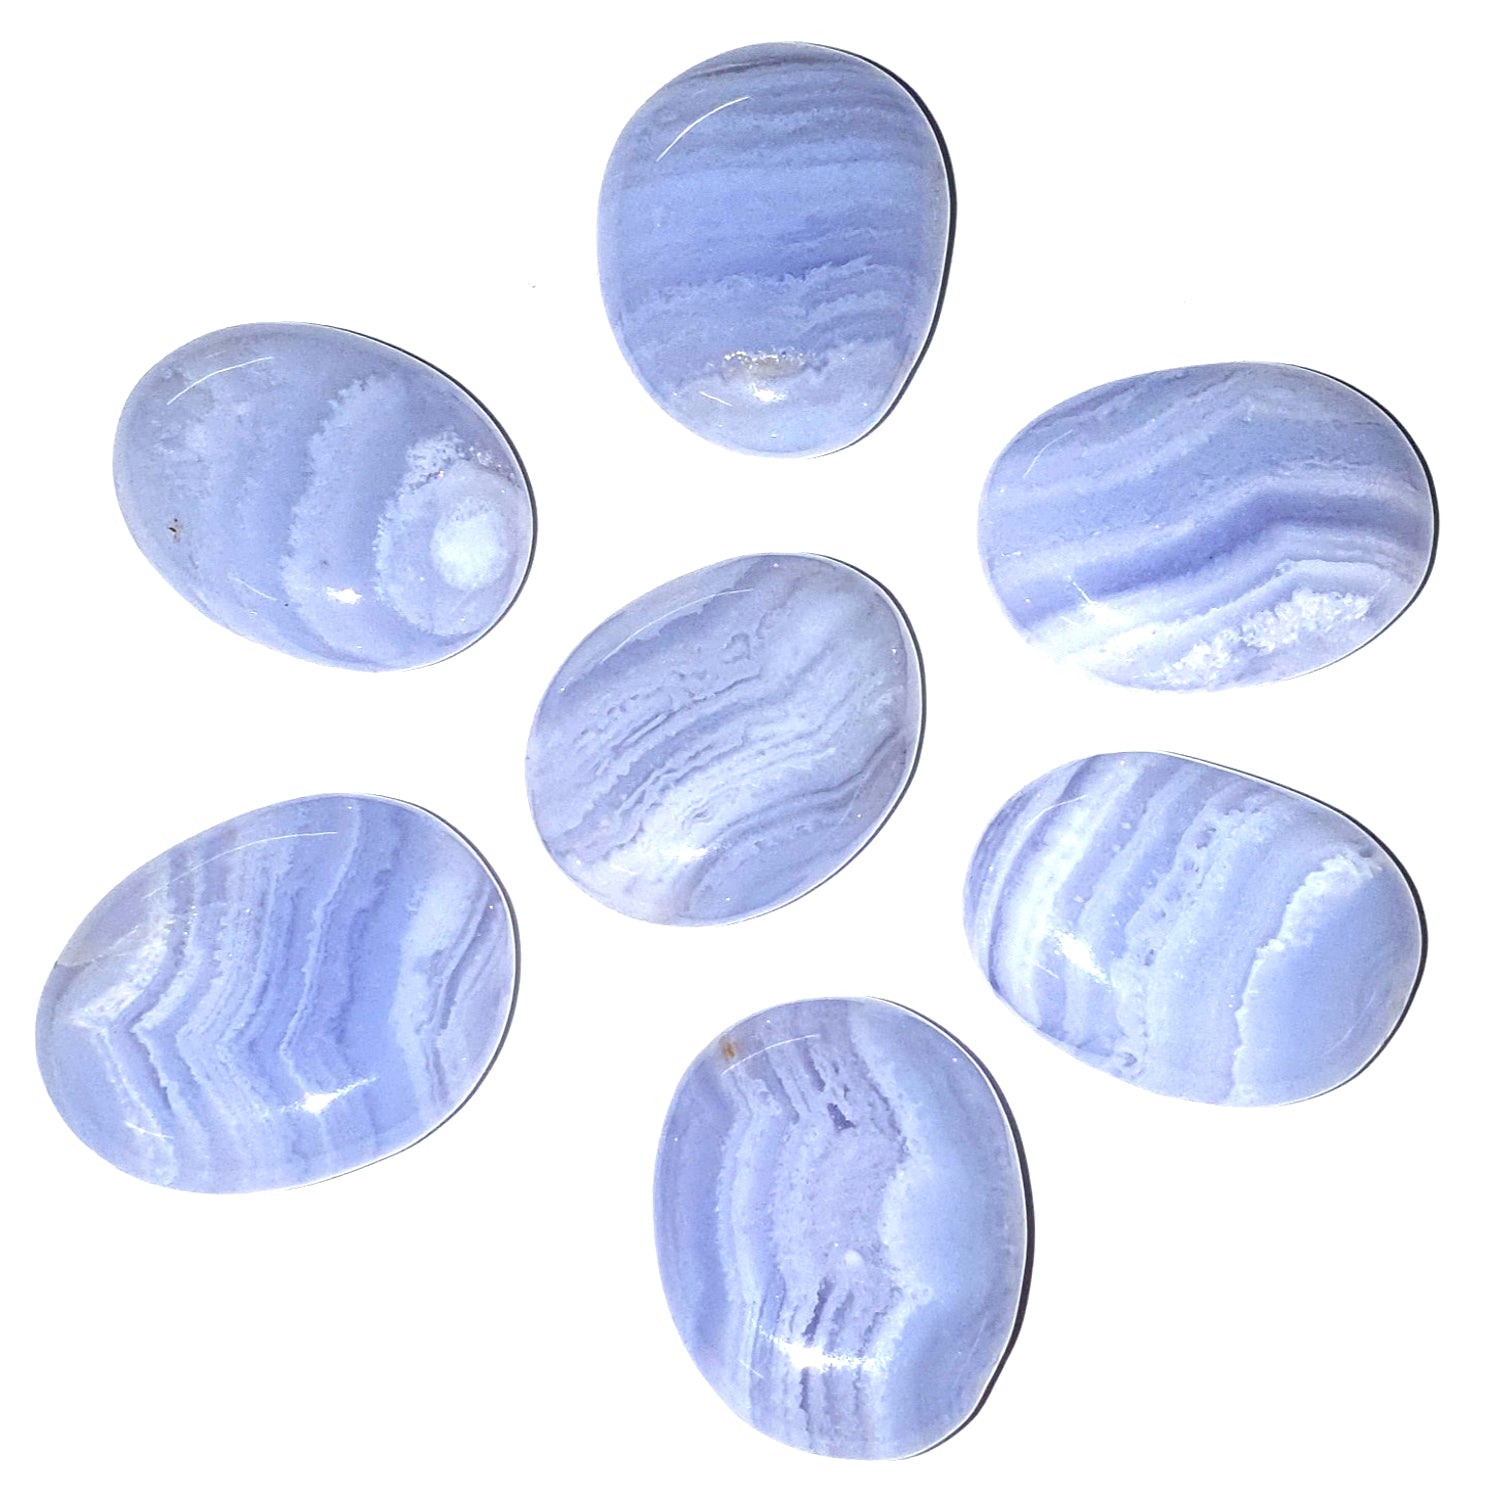 Blue Lace Agate variety is a very cooling and calming stone, endowing us with a sense of peace and tranquillity. A powerful throat healer, it assists with the verbal expression of thoughts and feelings. Blue Lace Agate is a great nurturing and supportive stone, neutralising anger, infection, inflammation and fever.